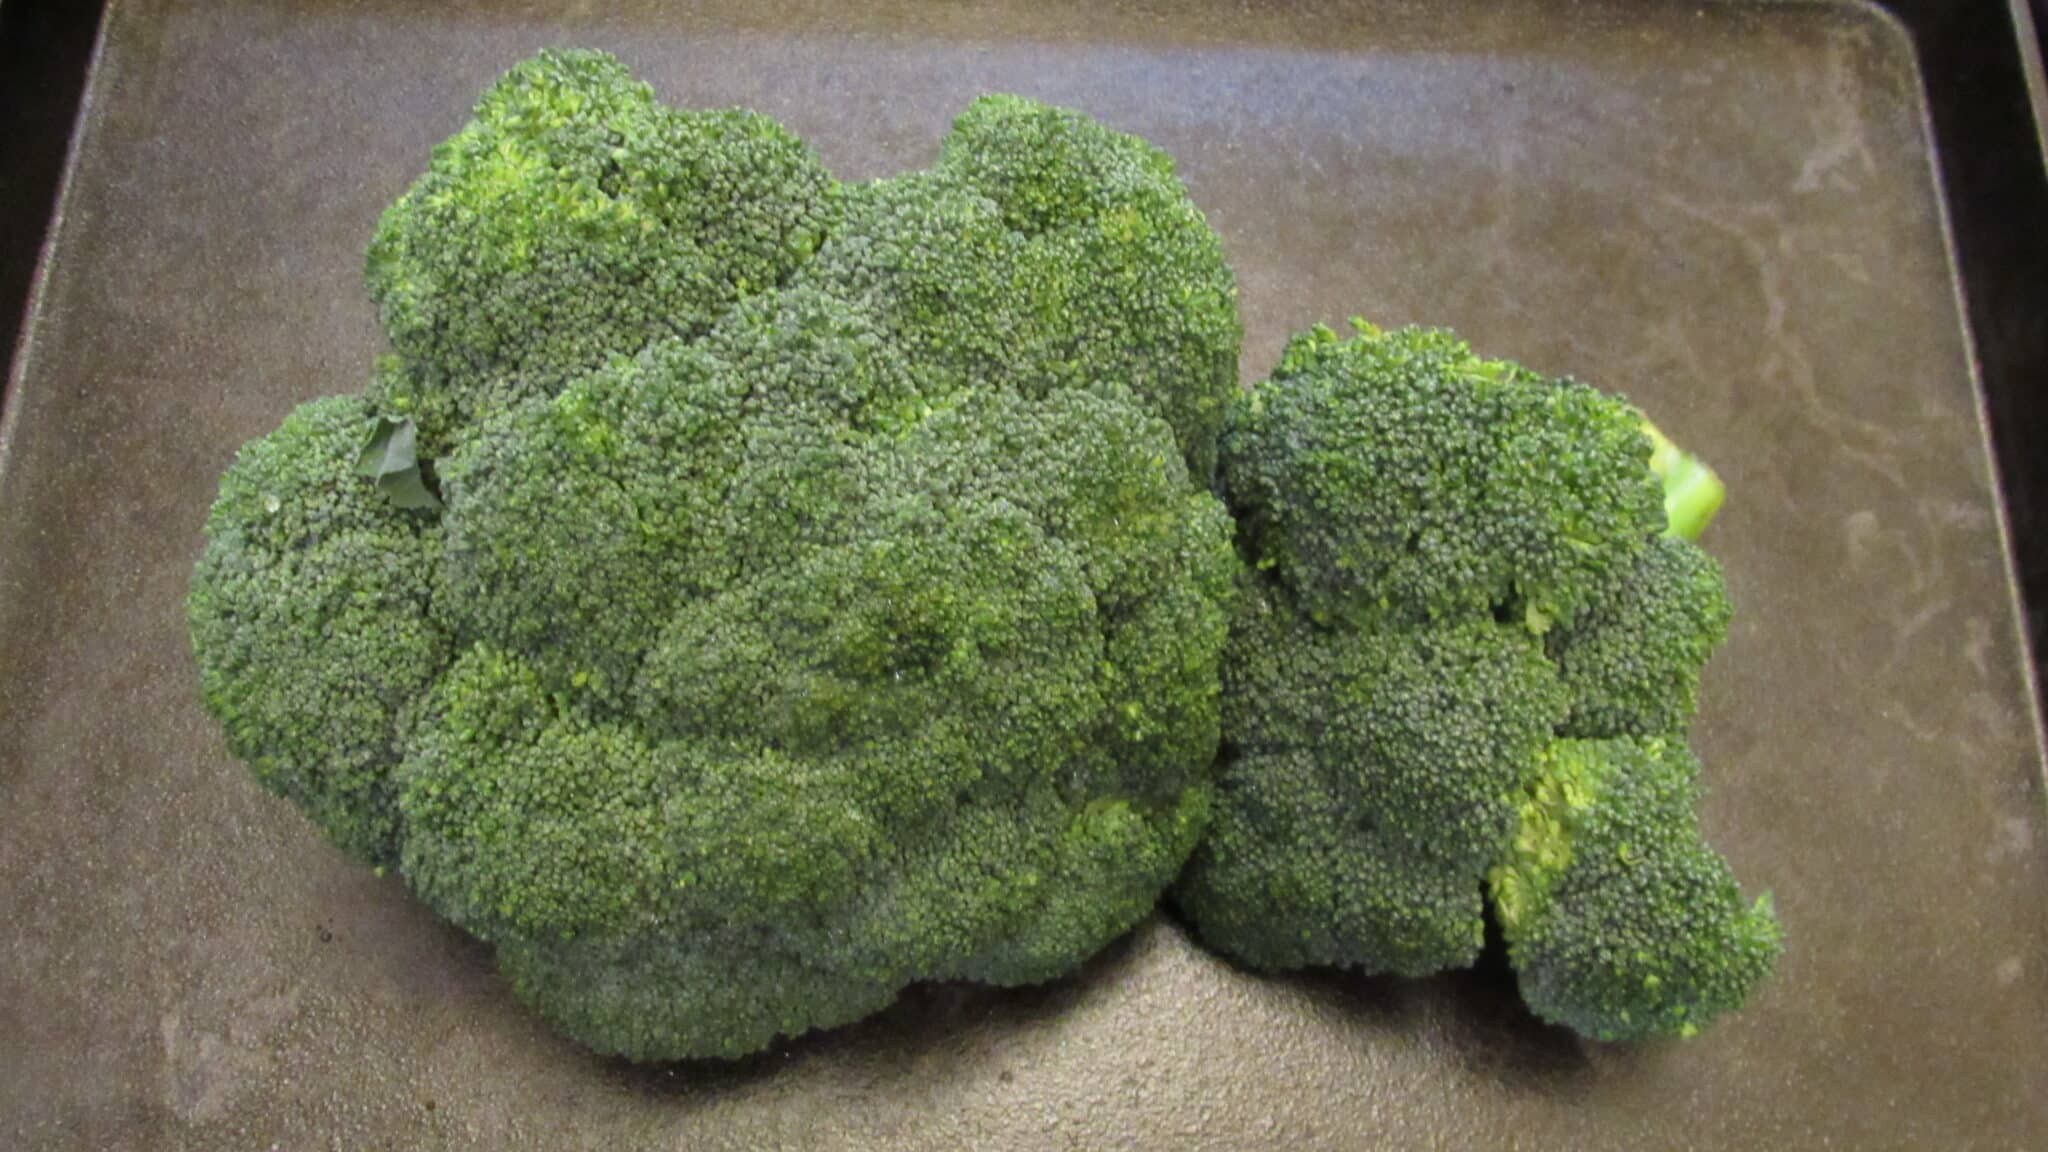 Two heads of broccoli.